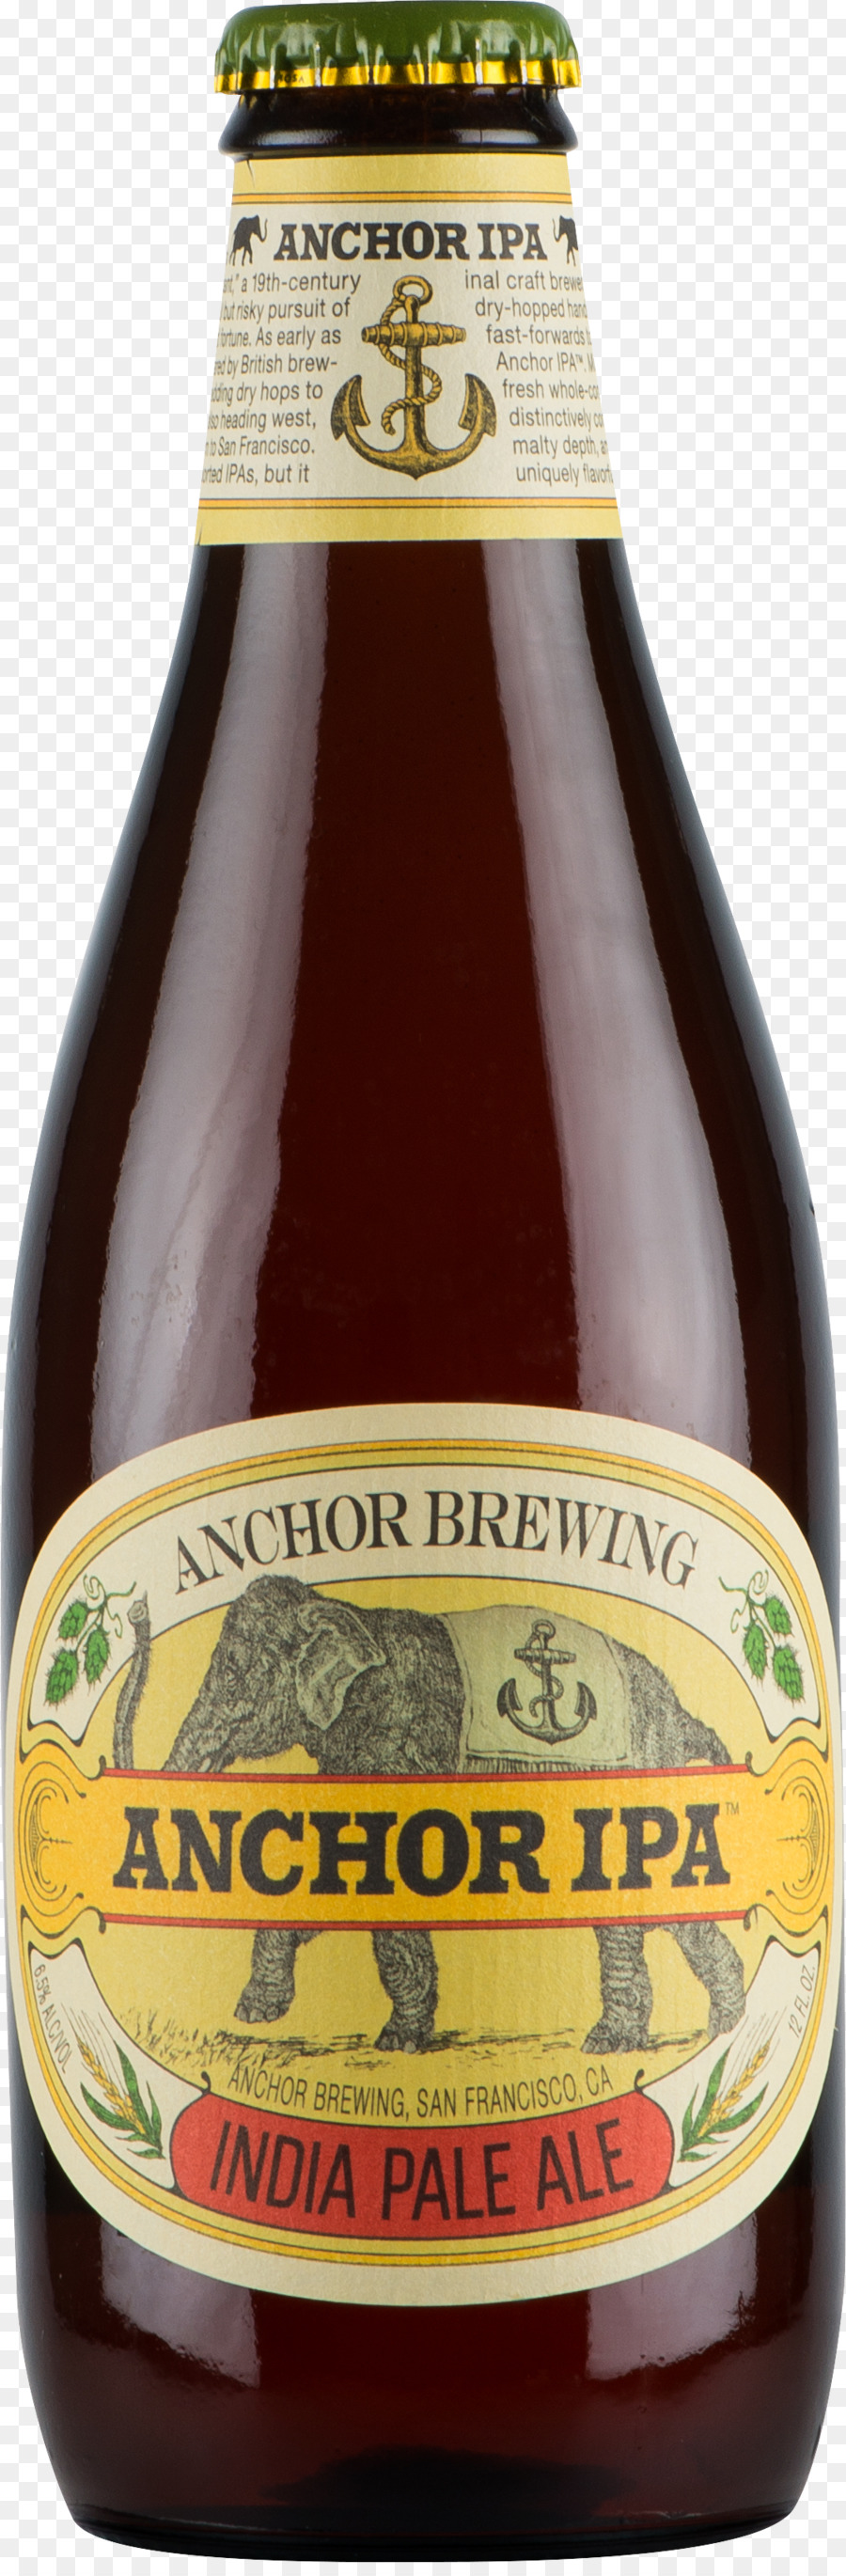 India pale ale, Anchor Brewing Company Weizen Bier - India Pale Ale